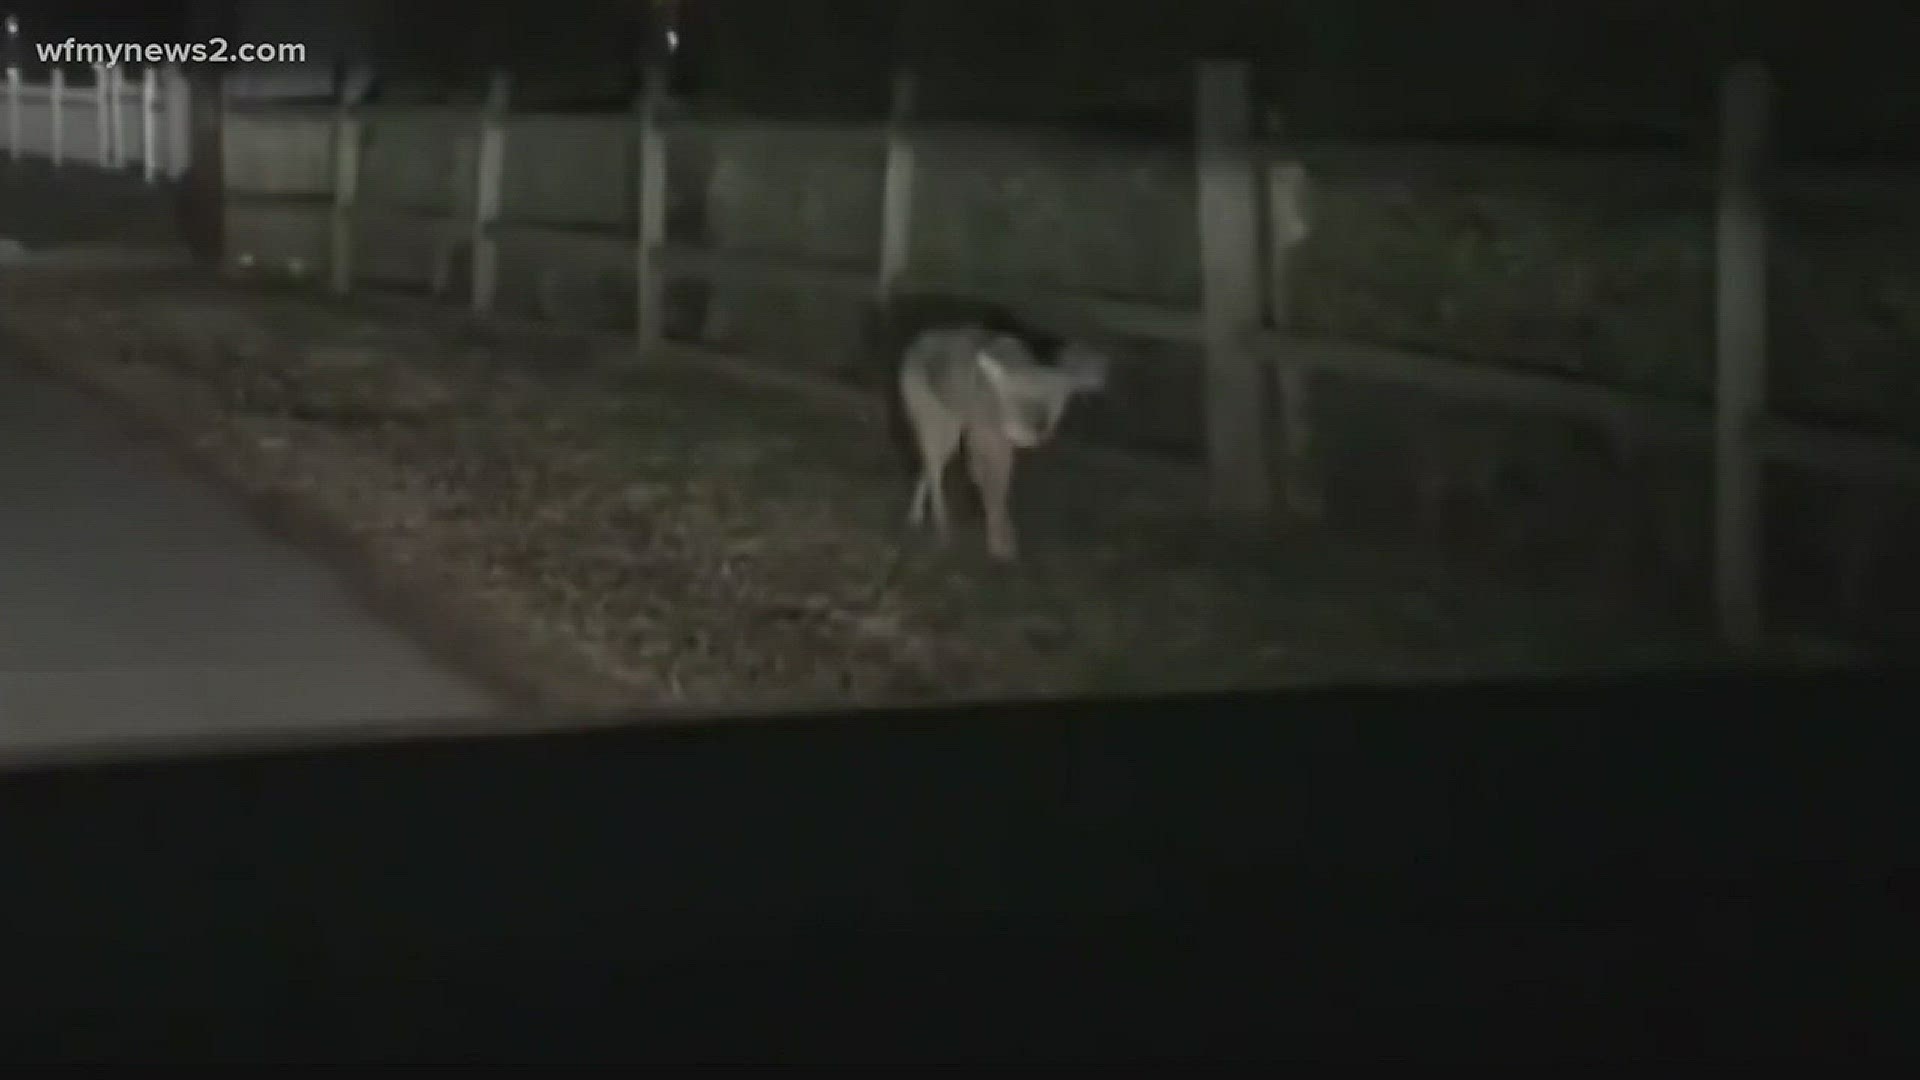 Family's Close Call With Coyote